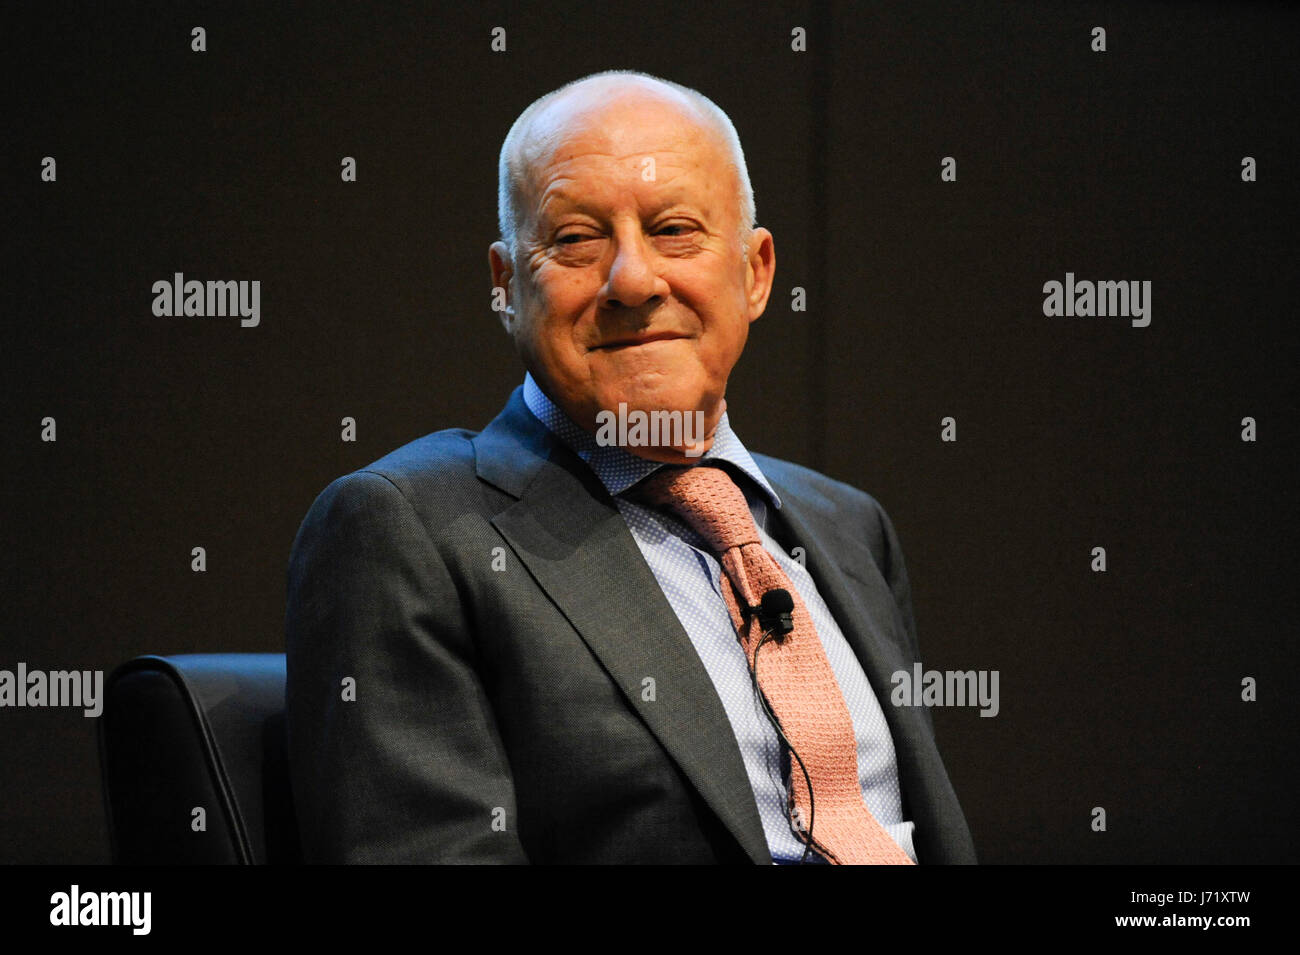 London, UK. 23rd May, 2017. Press preview of 'Cartier in Motion', an exhibition on Cartier, co-curated by celebrated architect Lord Norman Foster (pictured) and Design Museum director Deyan Sudjic, at the Design Museum in London. The exhibition runs from 25 May to 28 July 2017. Credit: Stephen Chung/Alamy Live News Stock Photo